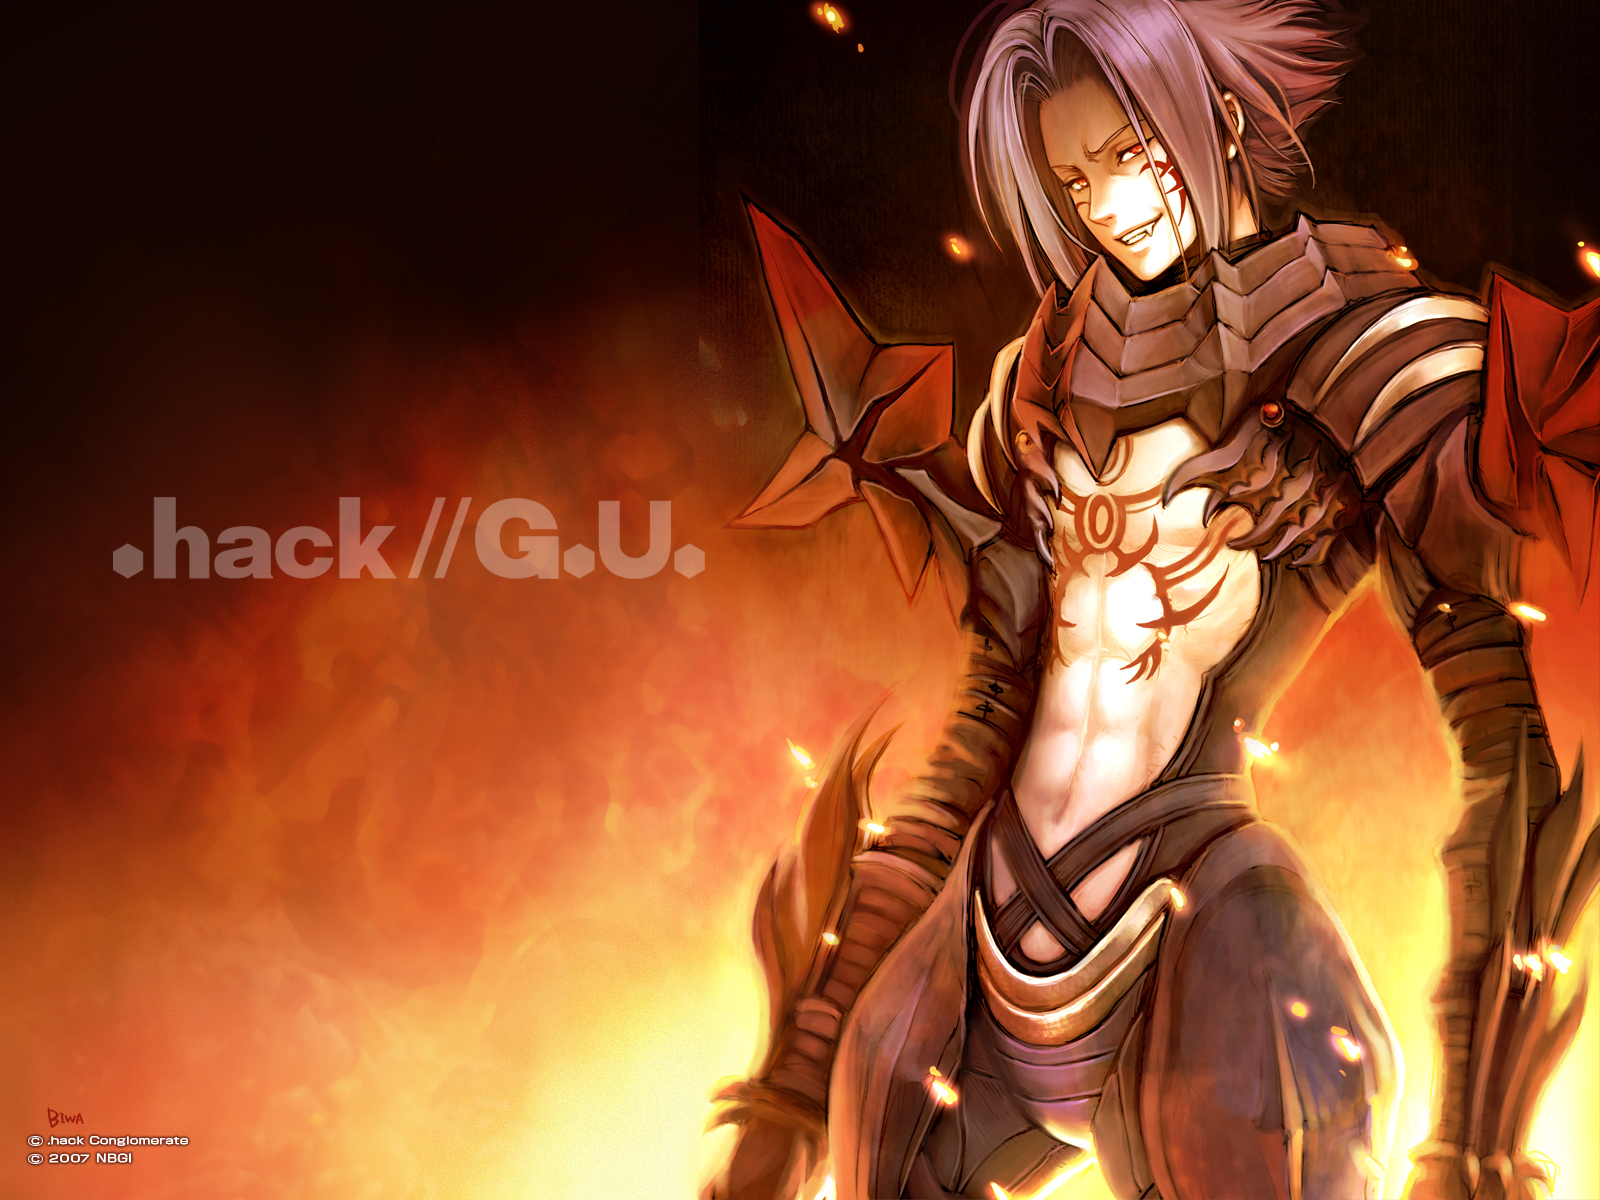 Hack G U Wallpapers Anime Hq Hack G U Pictures 4k Wallpapers 19